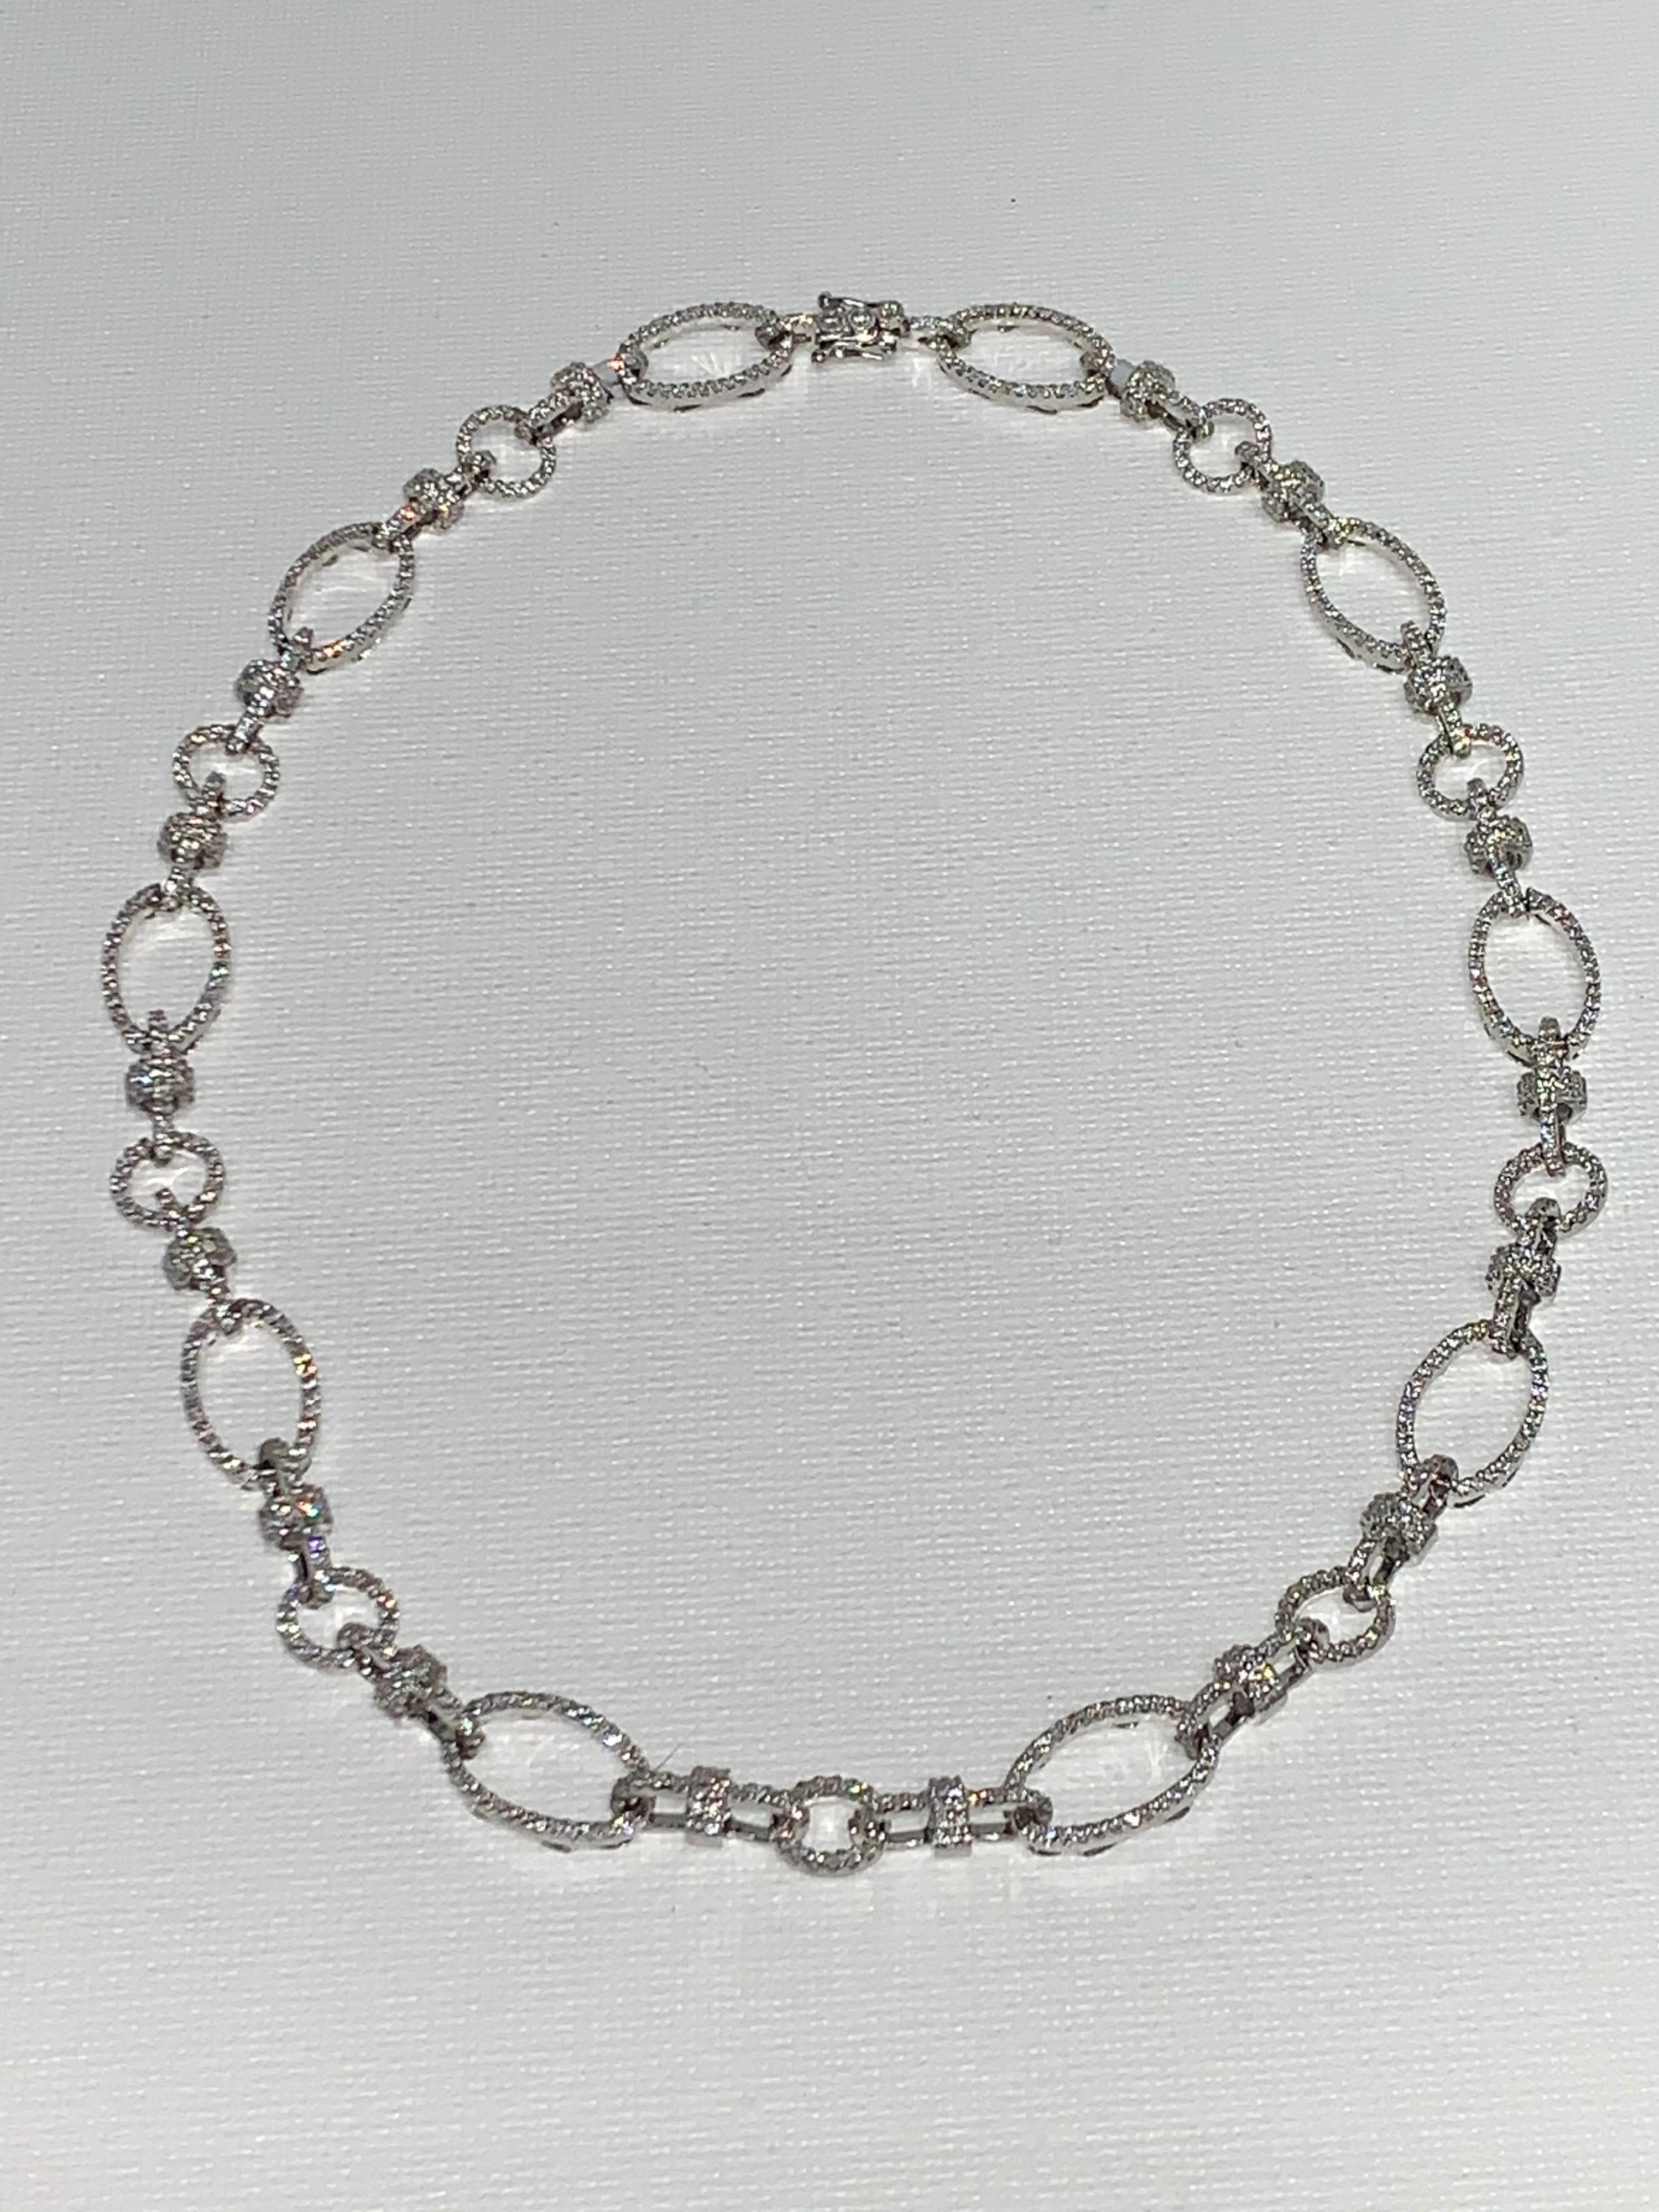 Pavé Diamond, White Gold Necklace, Art Deco 

Featuring a White Pavé Diamond Necklace with a total weight of 4.67 carats, set in 18K White Gold 

This one-of-a-kind necklace was created by hand and in CAD, Computer Aided Design. The diamonds were